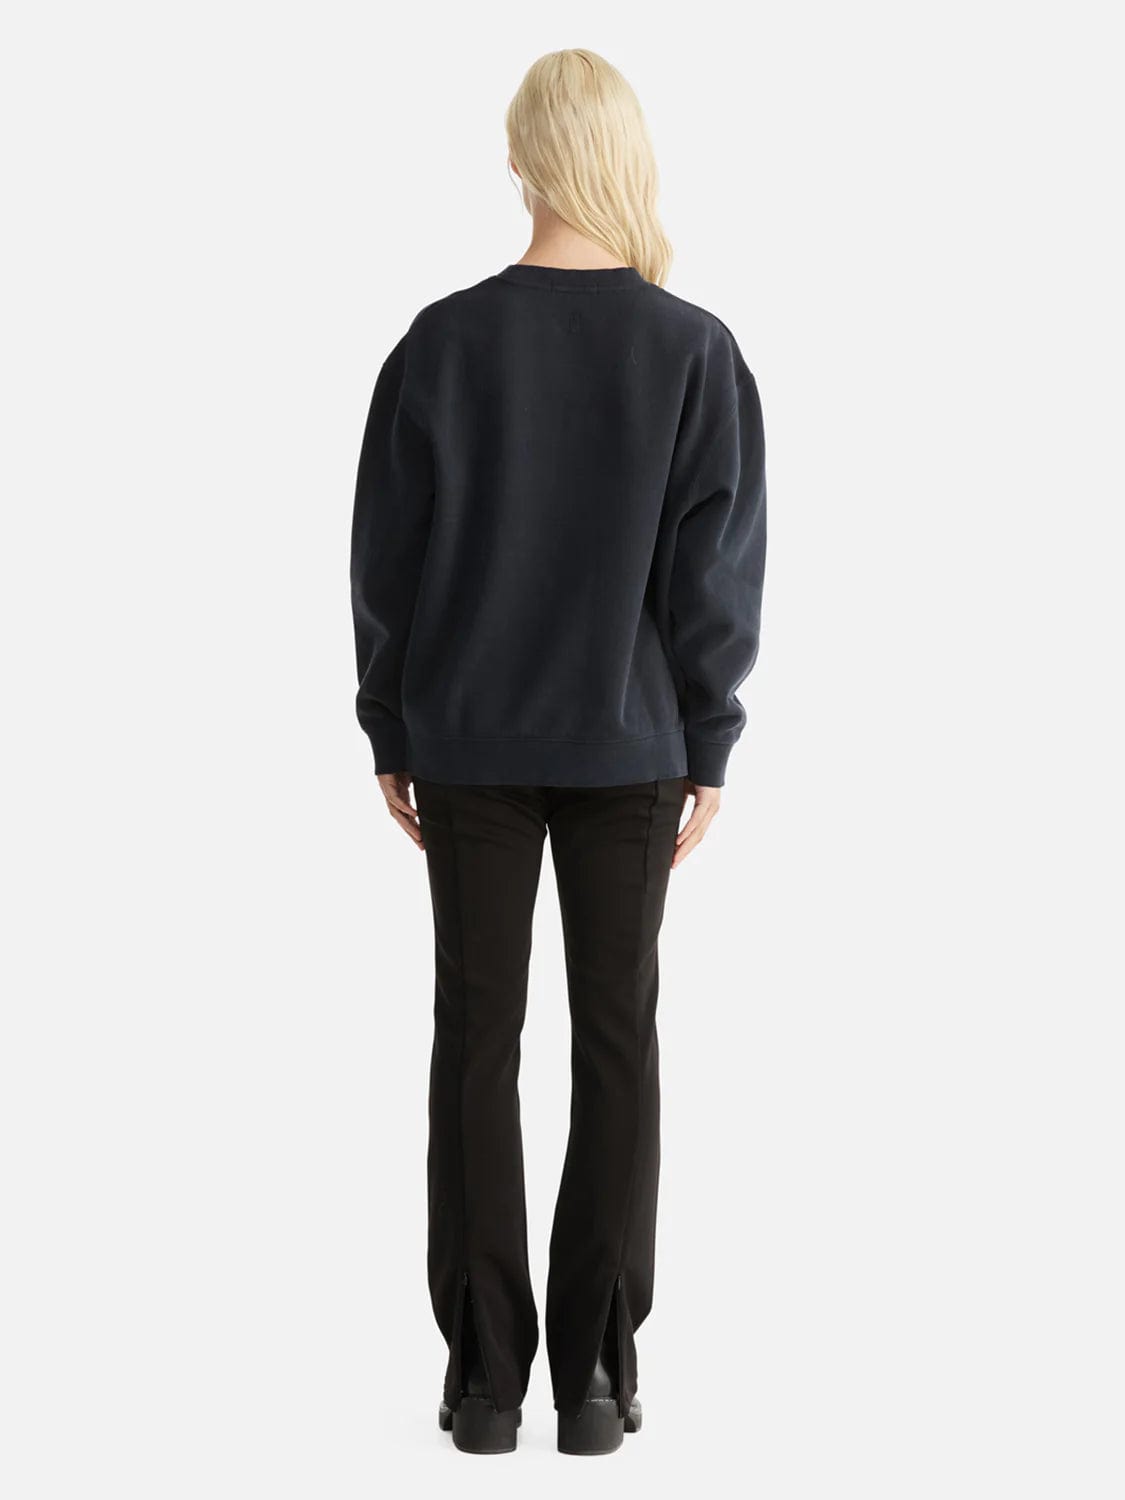 Ena Pelly Sweaters Ena Pelly | Lilly Oversized Sweater Academy